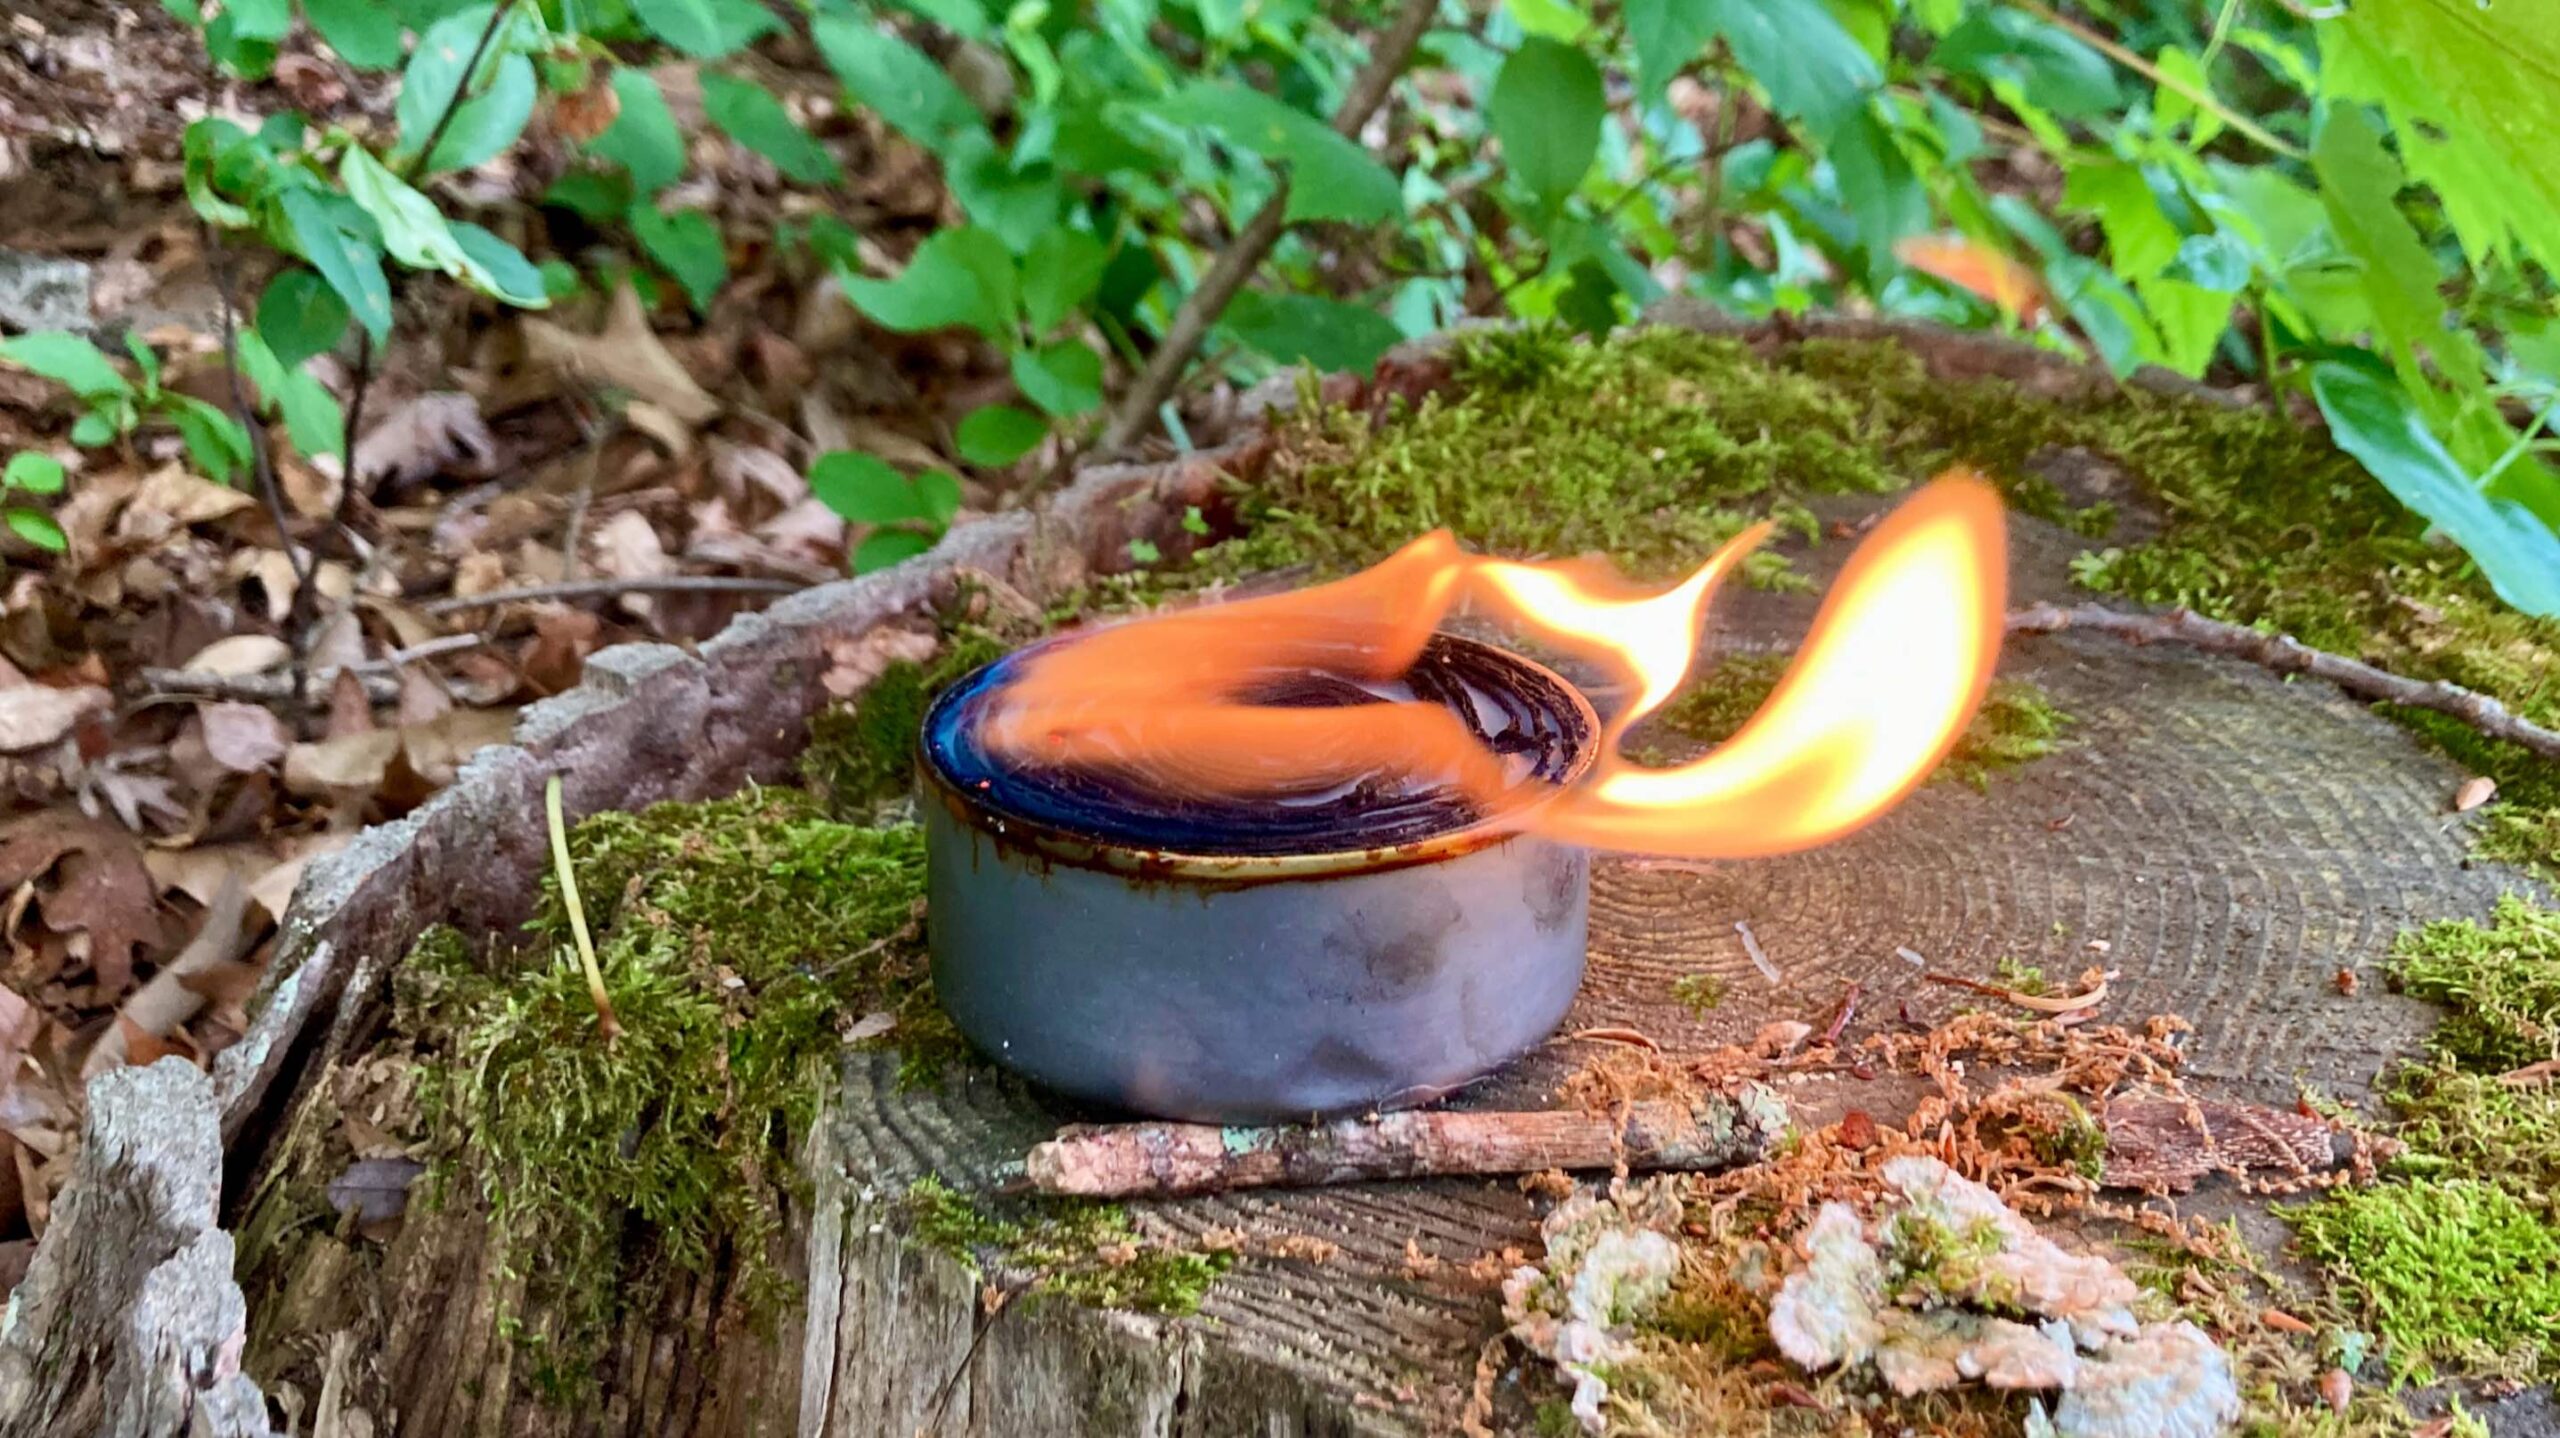 Survival Candle / Stove